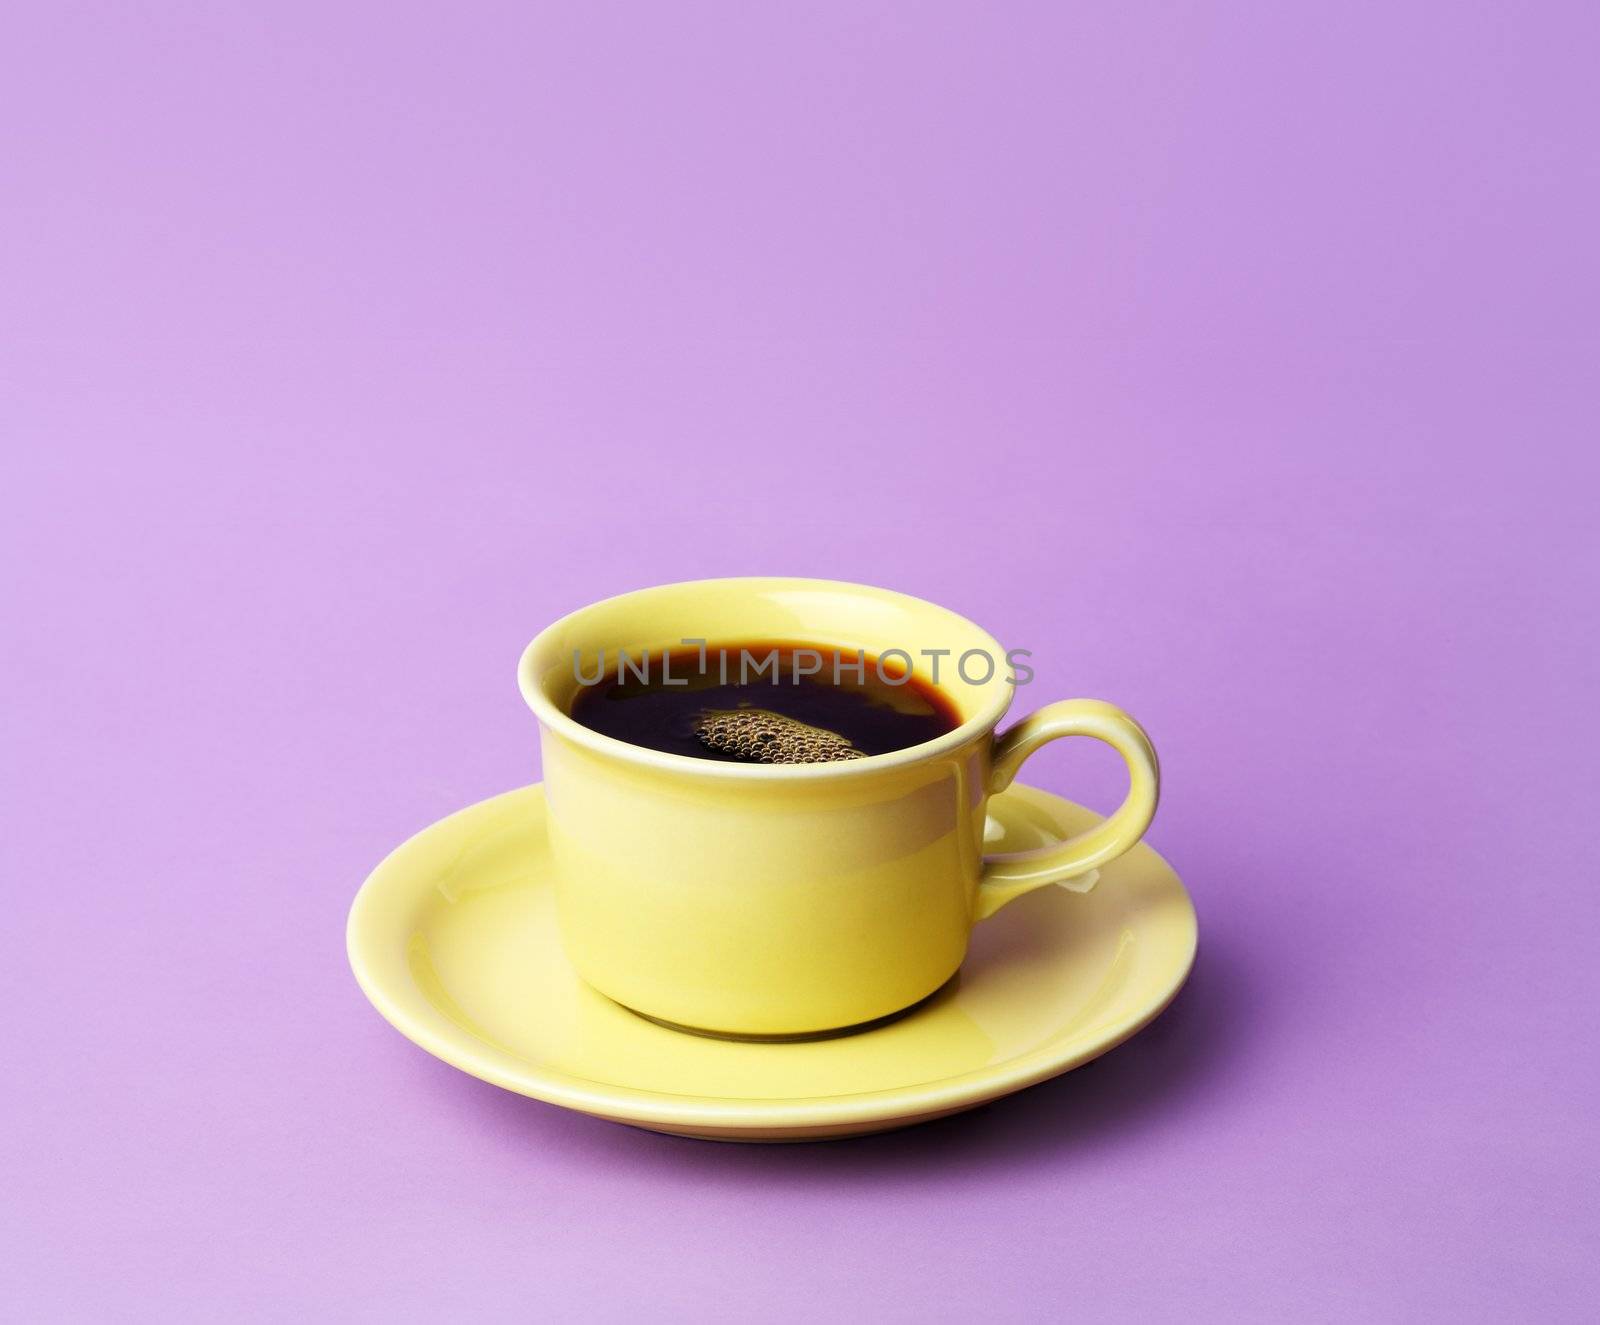 A yellow cup of fresh coffee on a lilac colored background